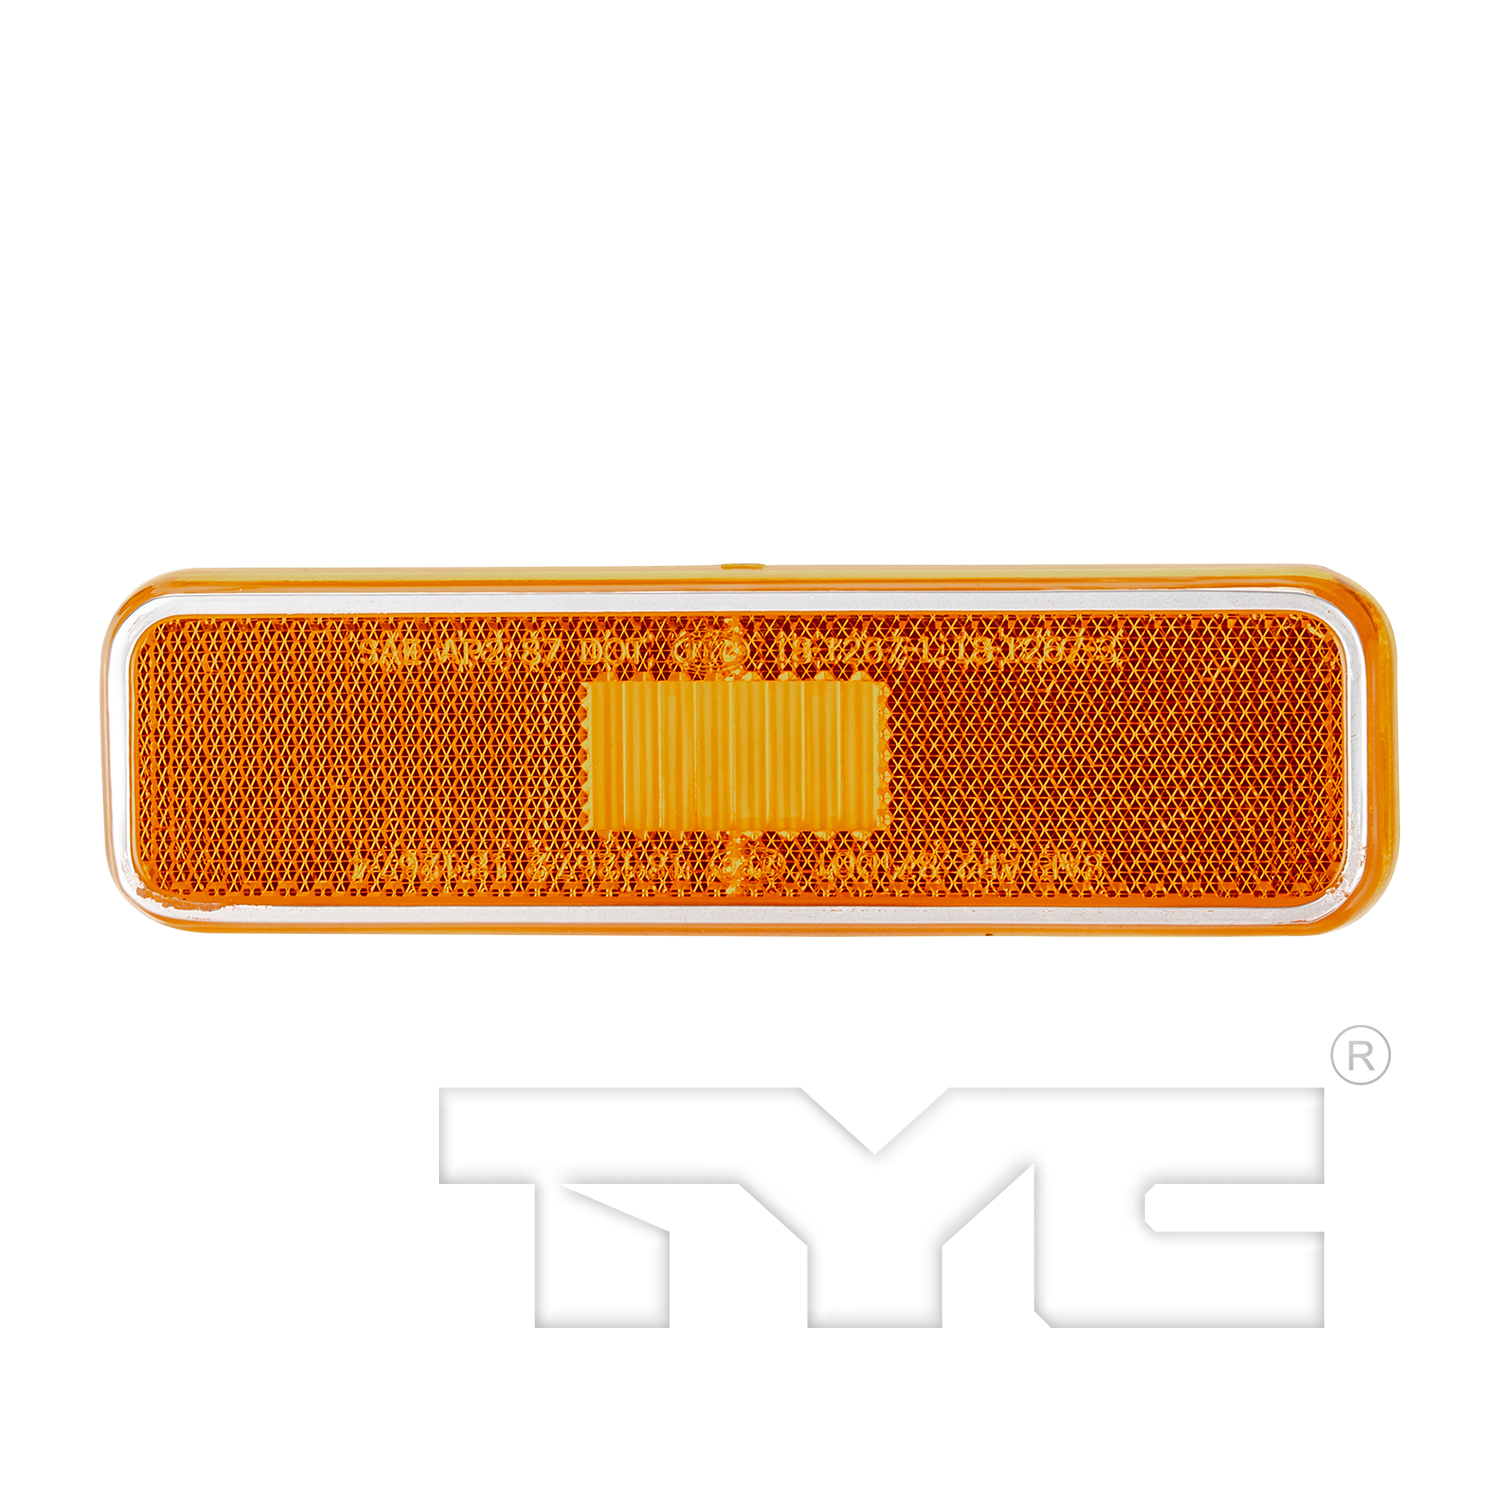 Aftermarket LAMPS for DODGE - W250, W250,81-93,LT Front marker lamp assy